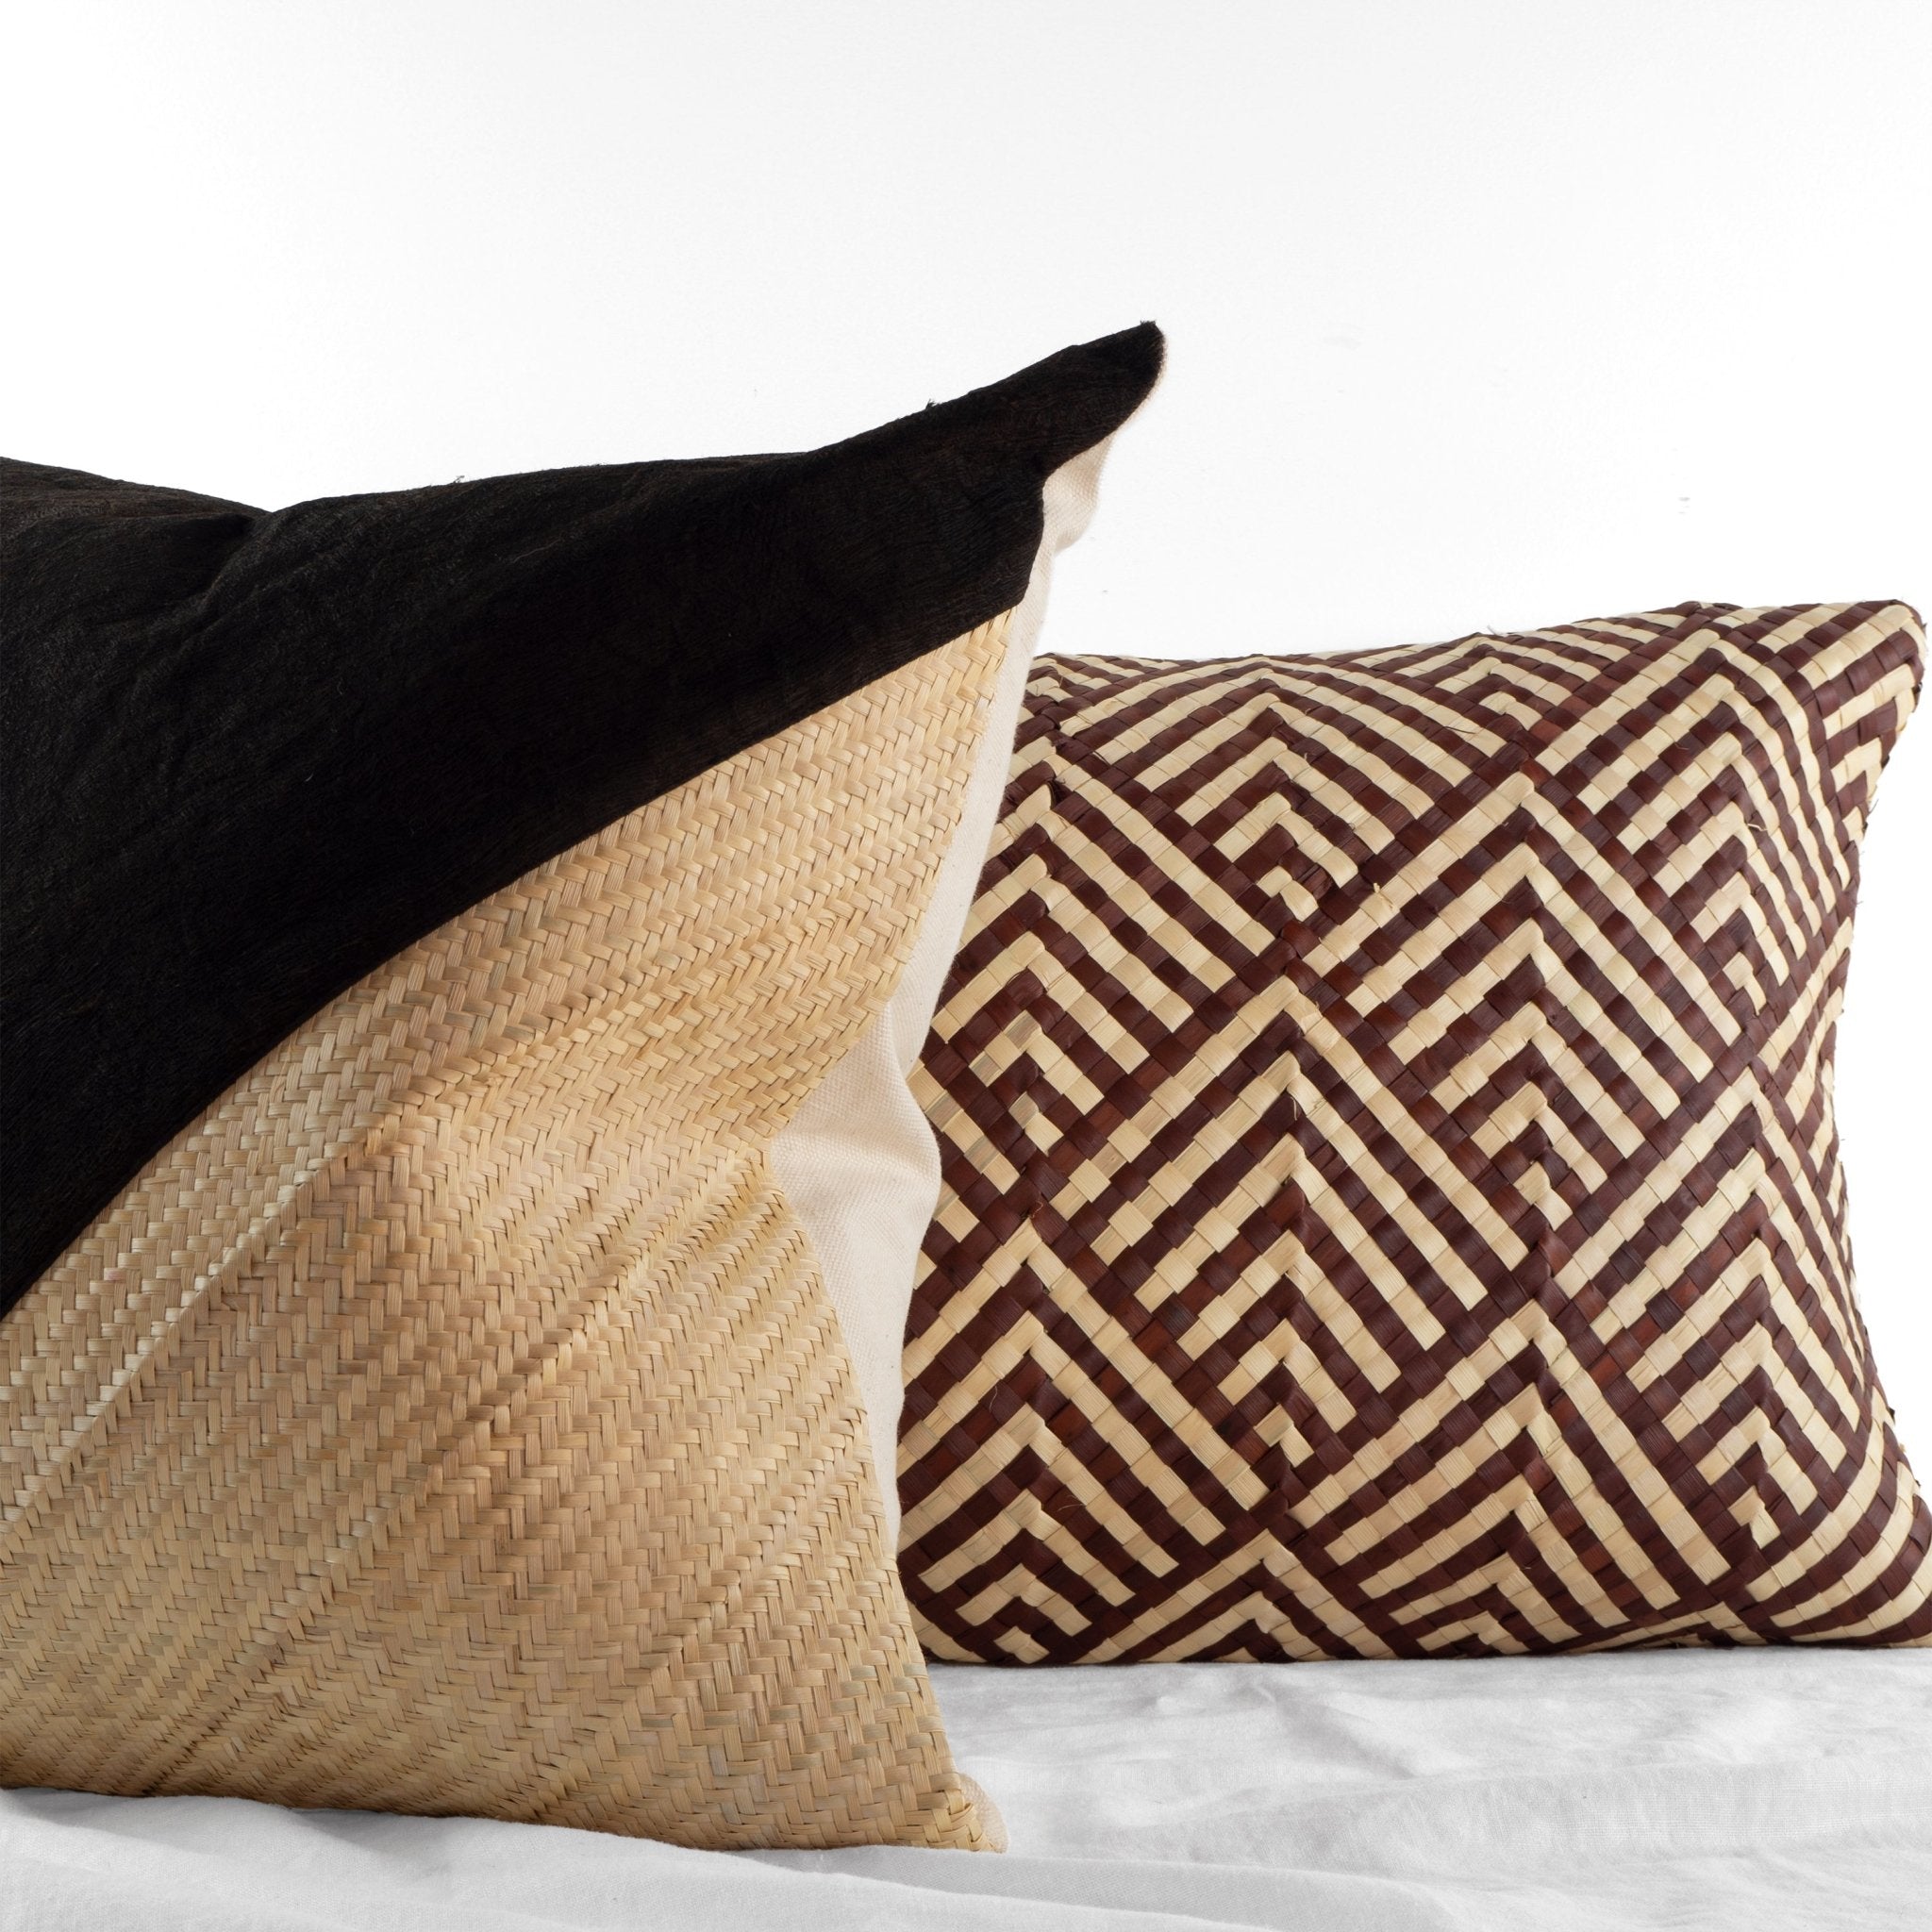 Two handwoven barkcloth and palm leaf cushions in intricate patterns from Kampala, Uganda